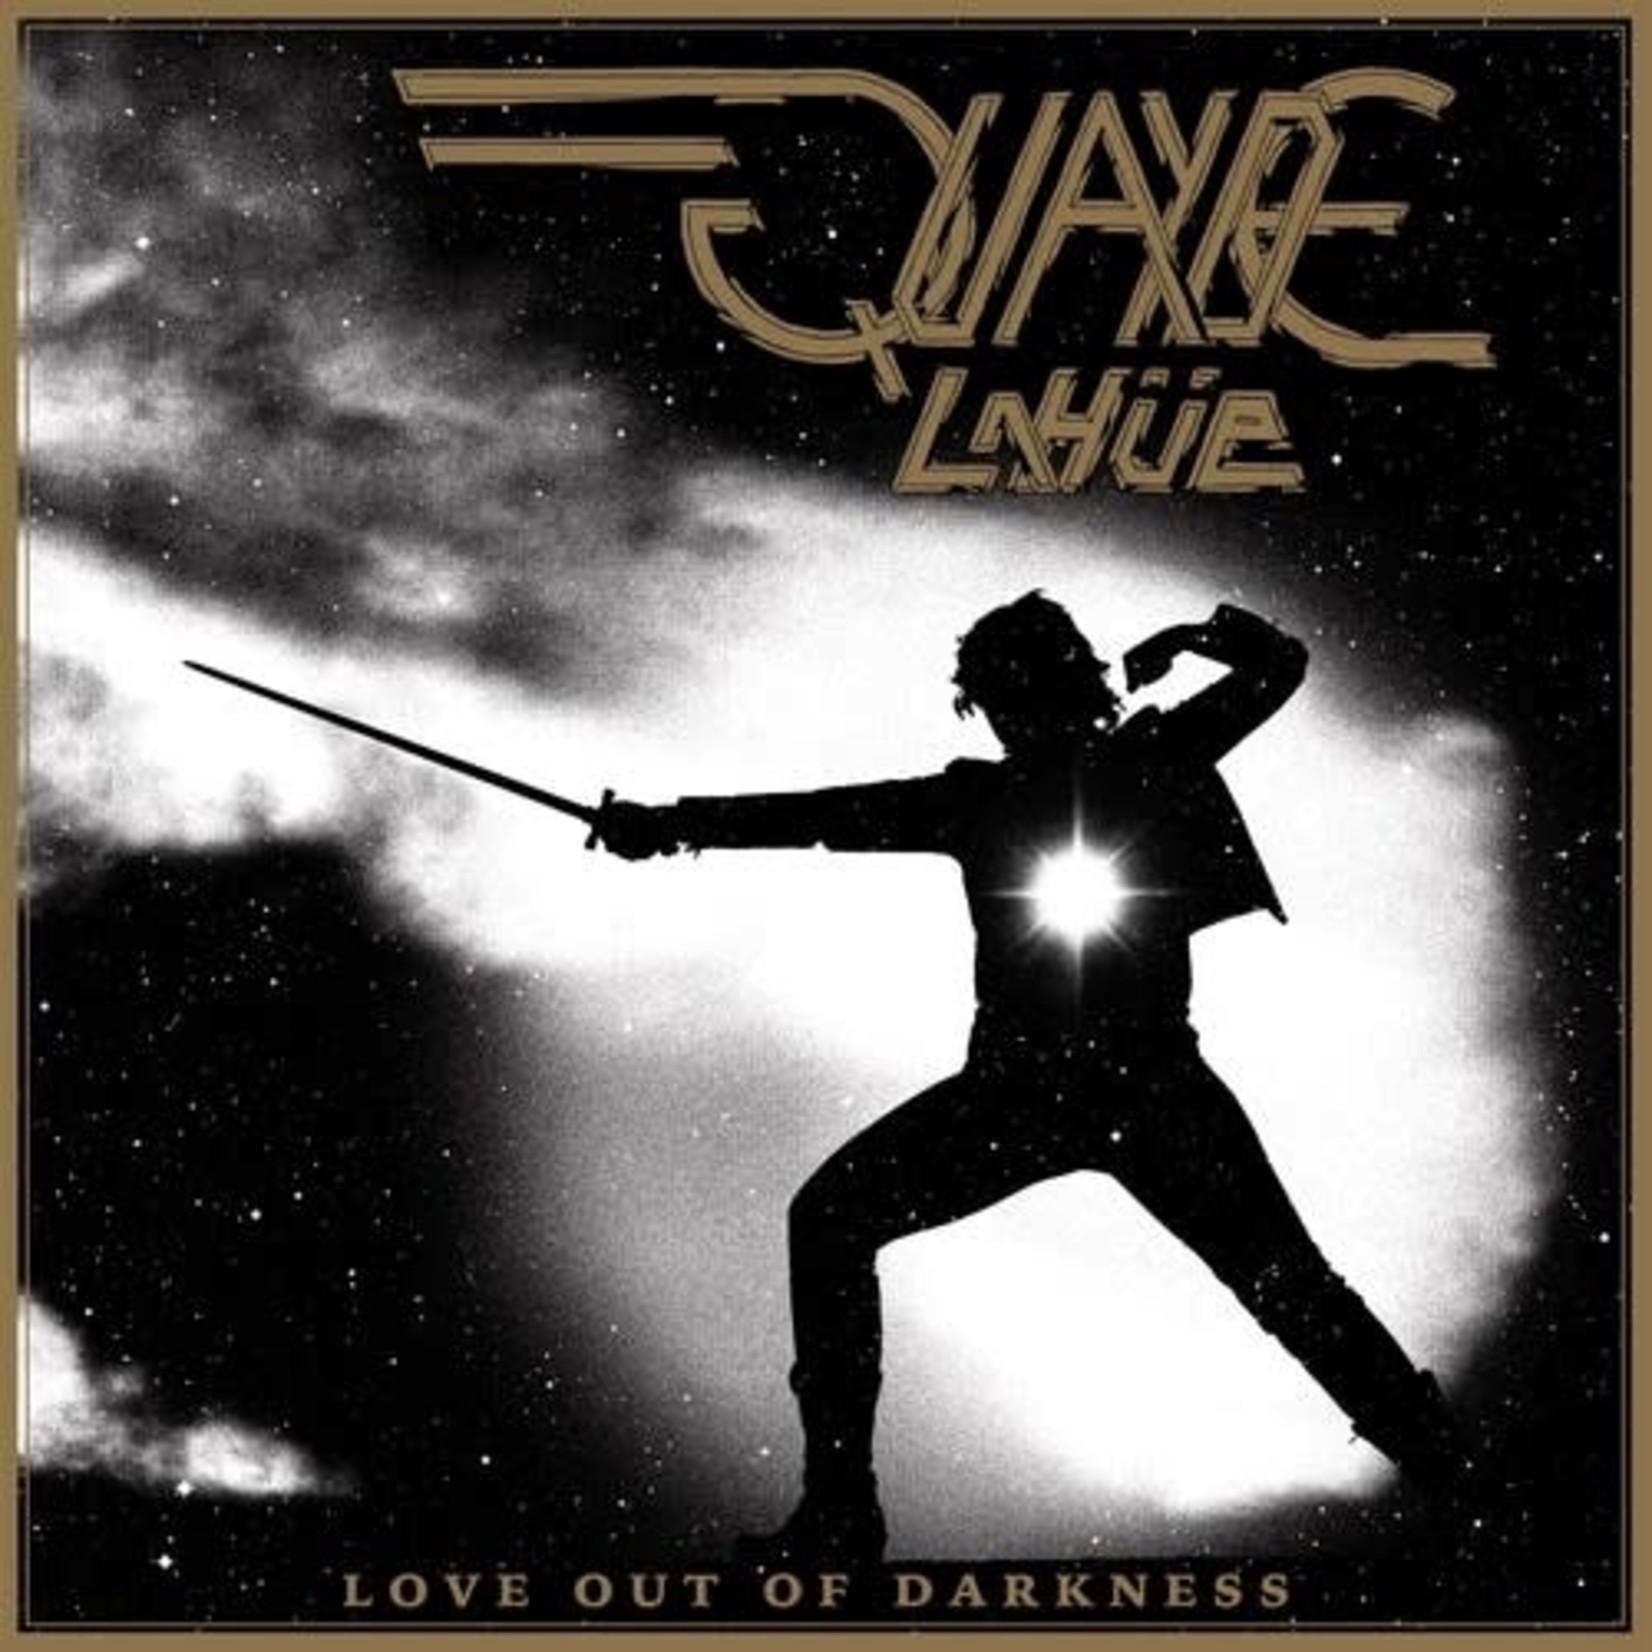 K Quayde LaHue - Love Out Of Darkness (LP)